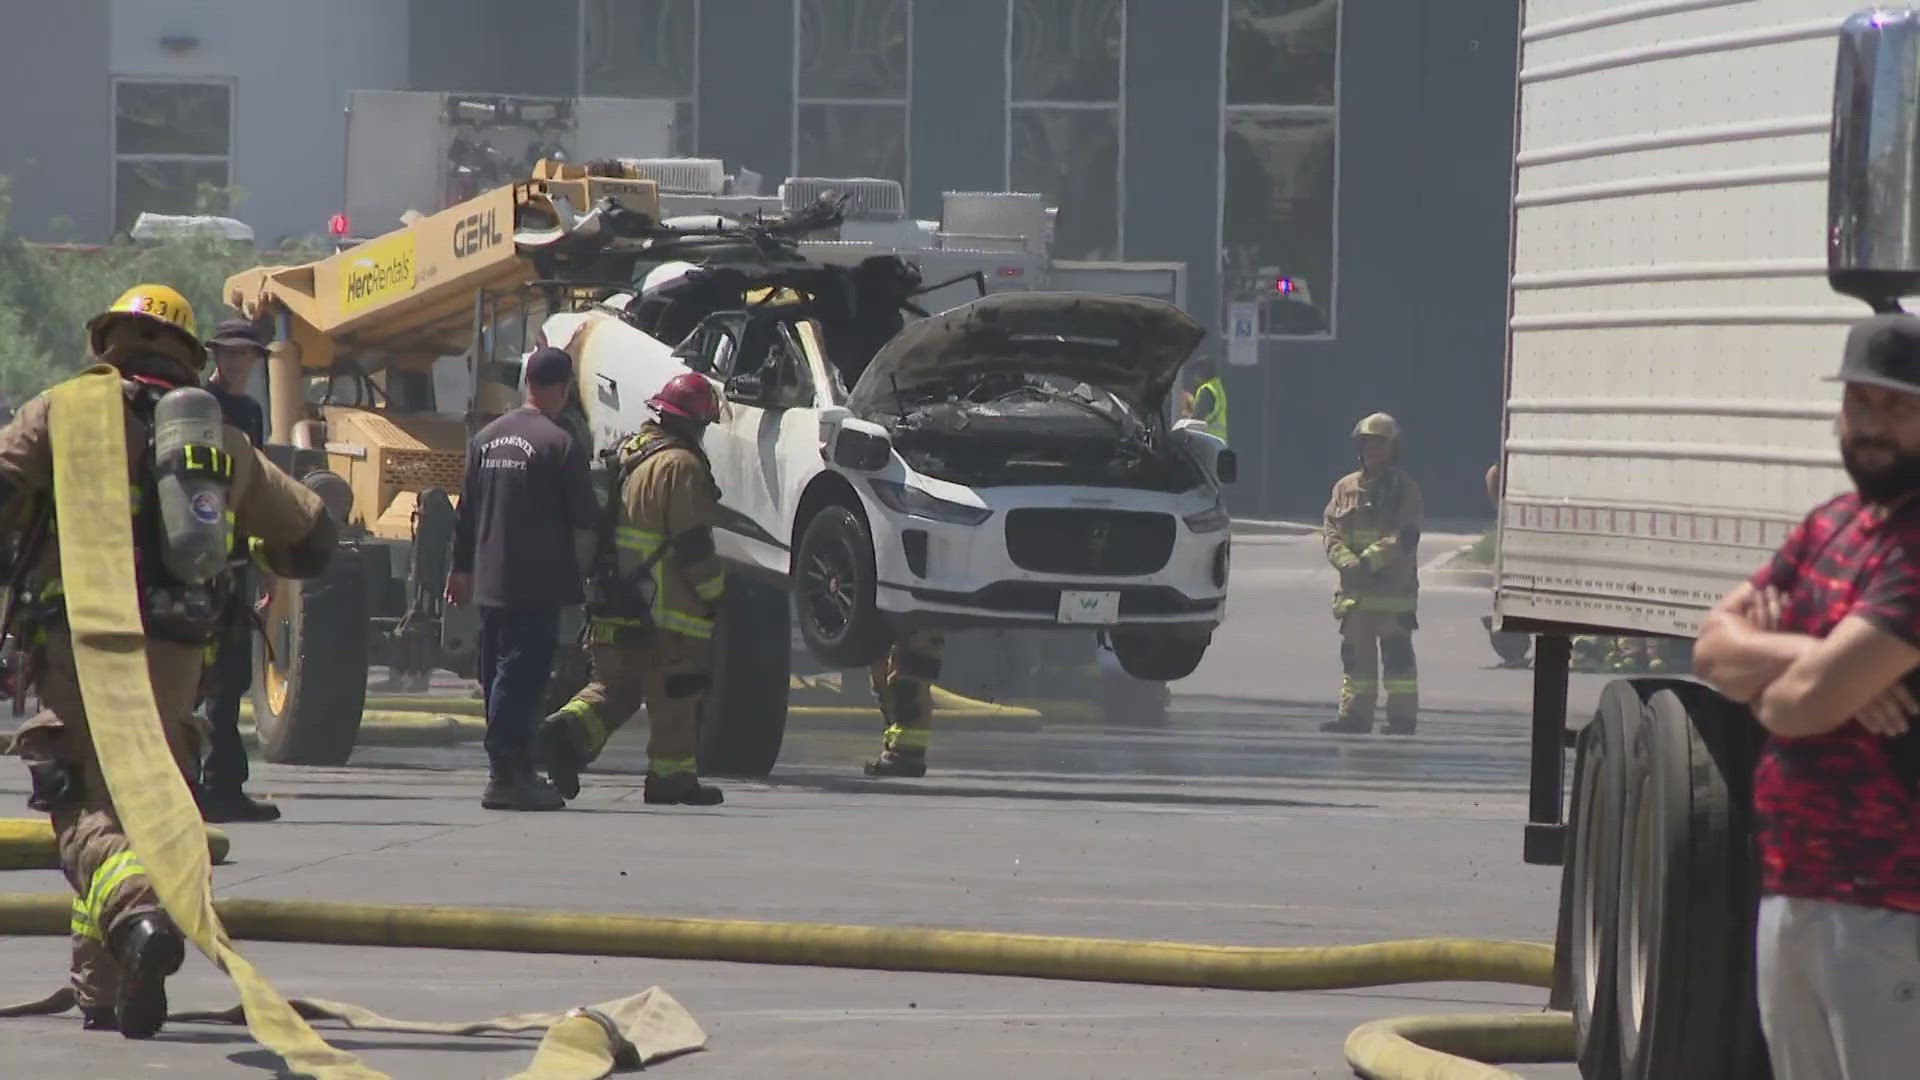 Waymo employees safely evacuated the building and no injuries were reported, according to the Phoenix Fire Department.